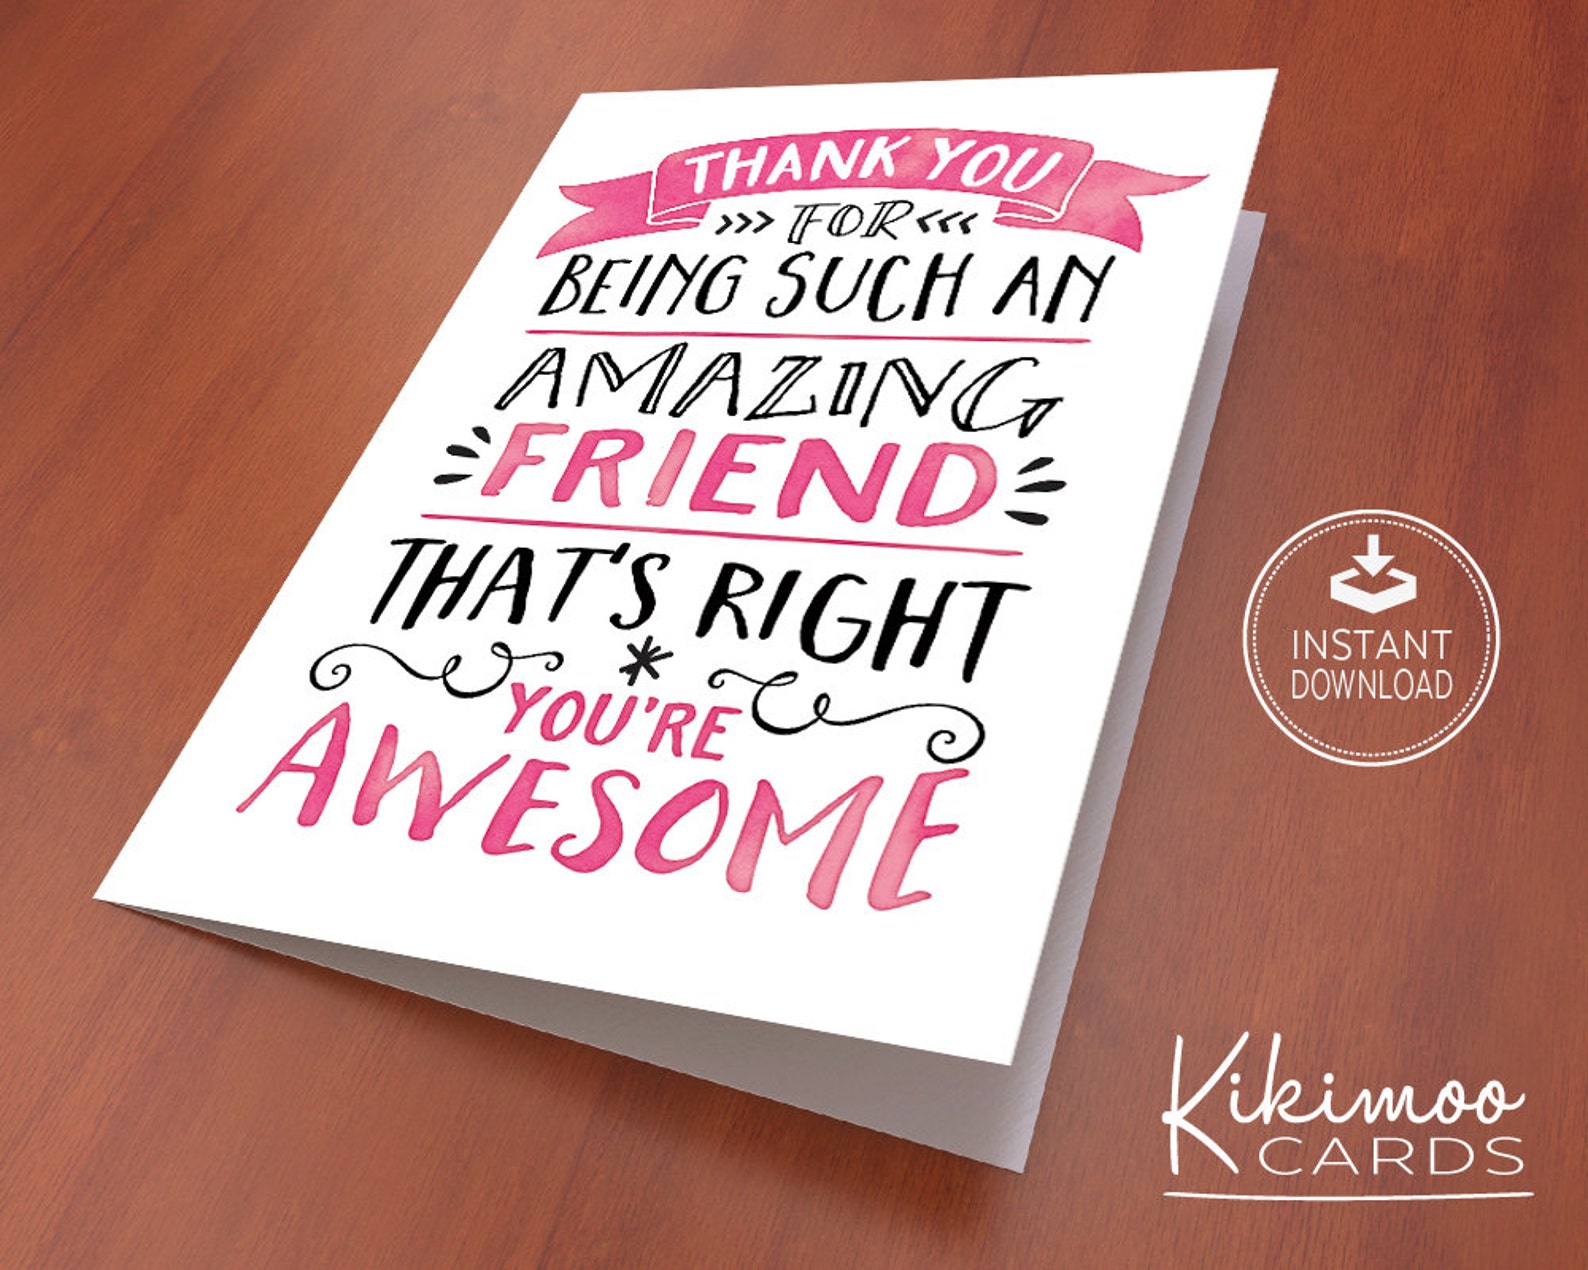 Thank You Cards Friendship Cards Thank You Friend Friend Etsy